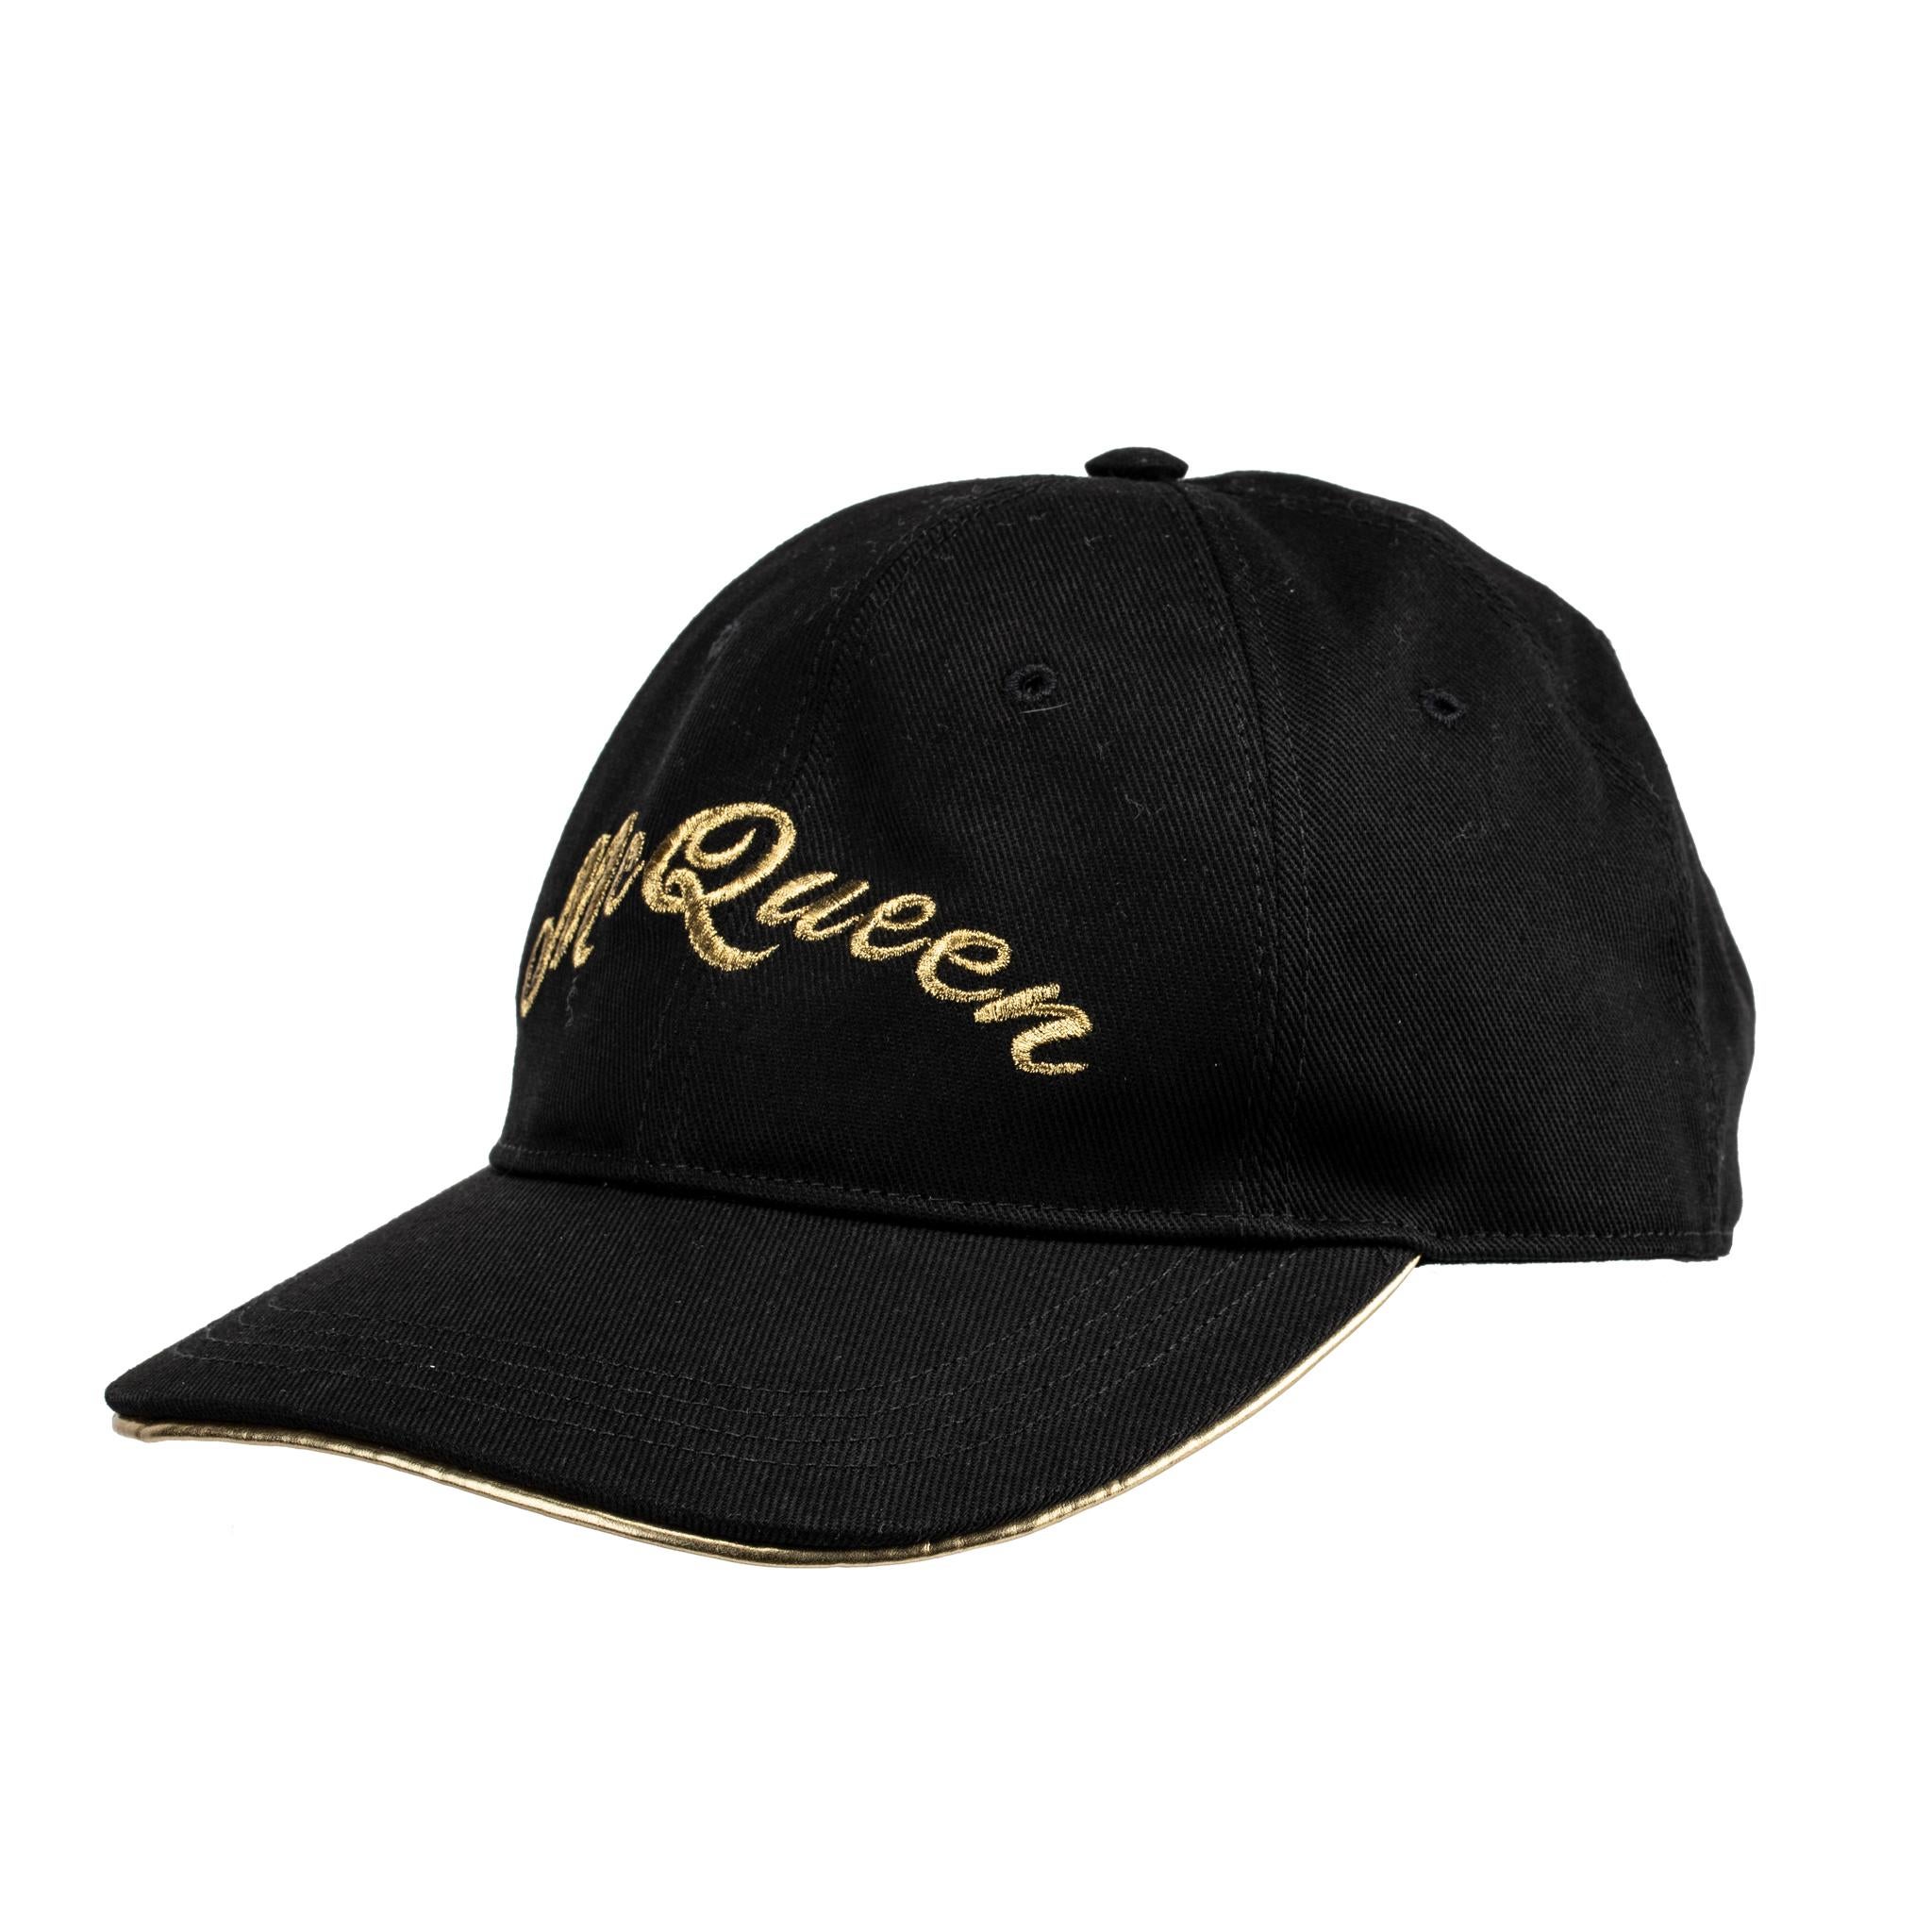 Alexander McQueen Embroidered Cap Black & Gold For Sale 1